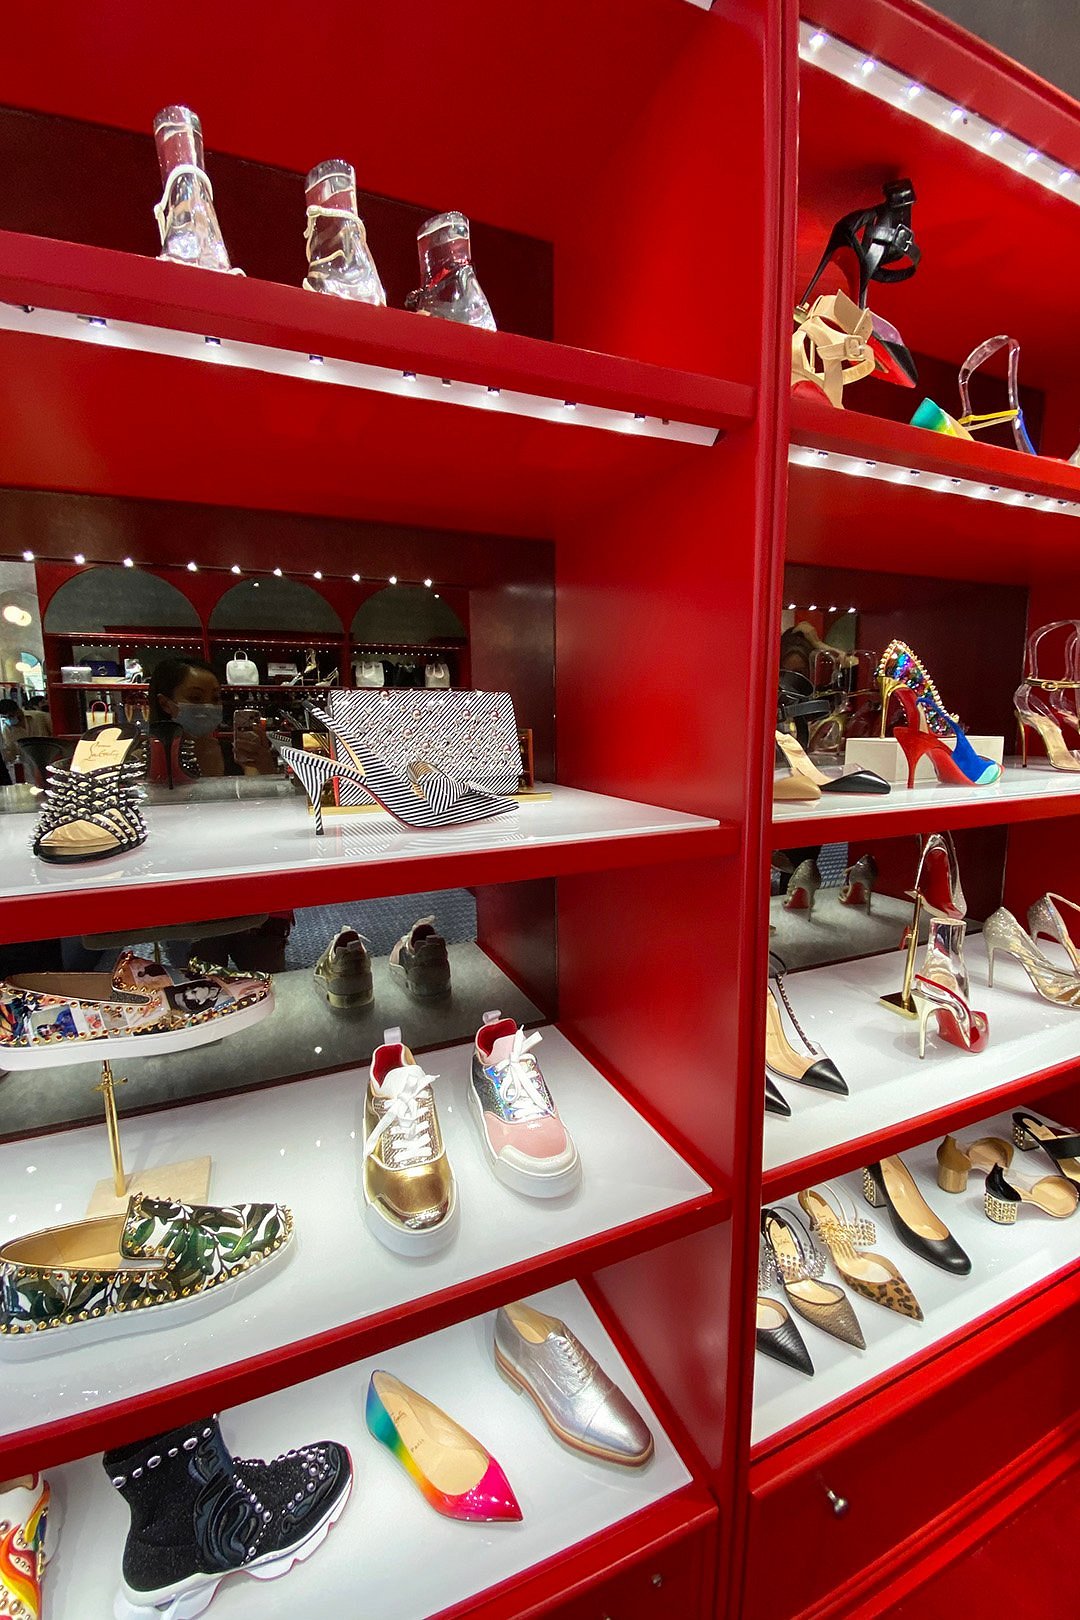 Christian Louboutin Outlet - All You Need to Know BEFORE You Go